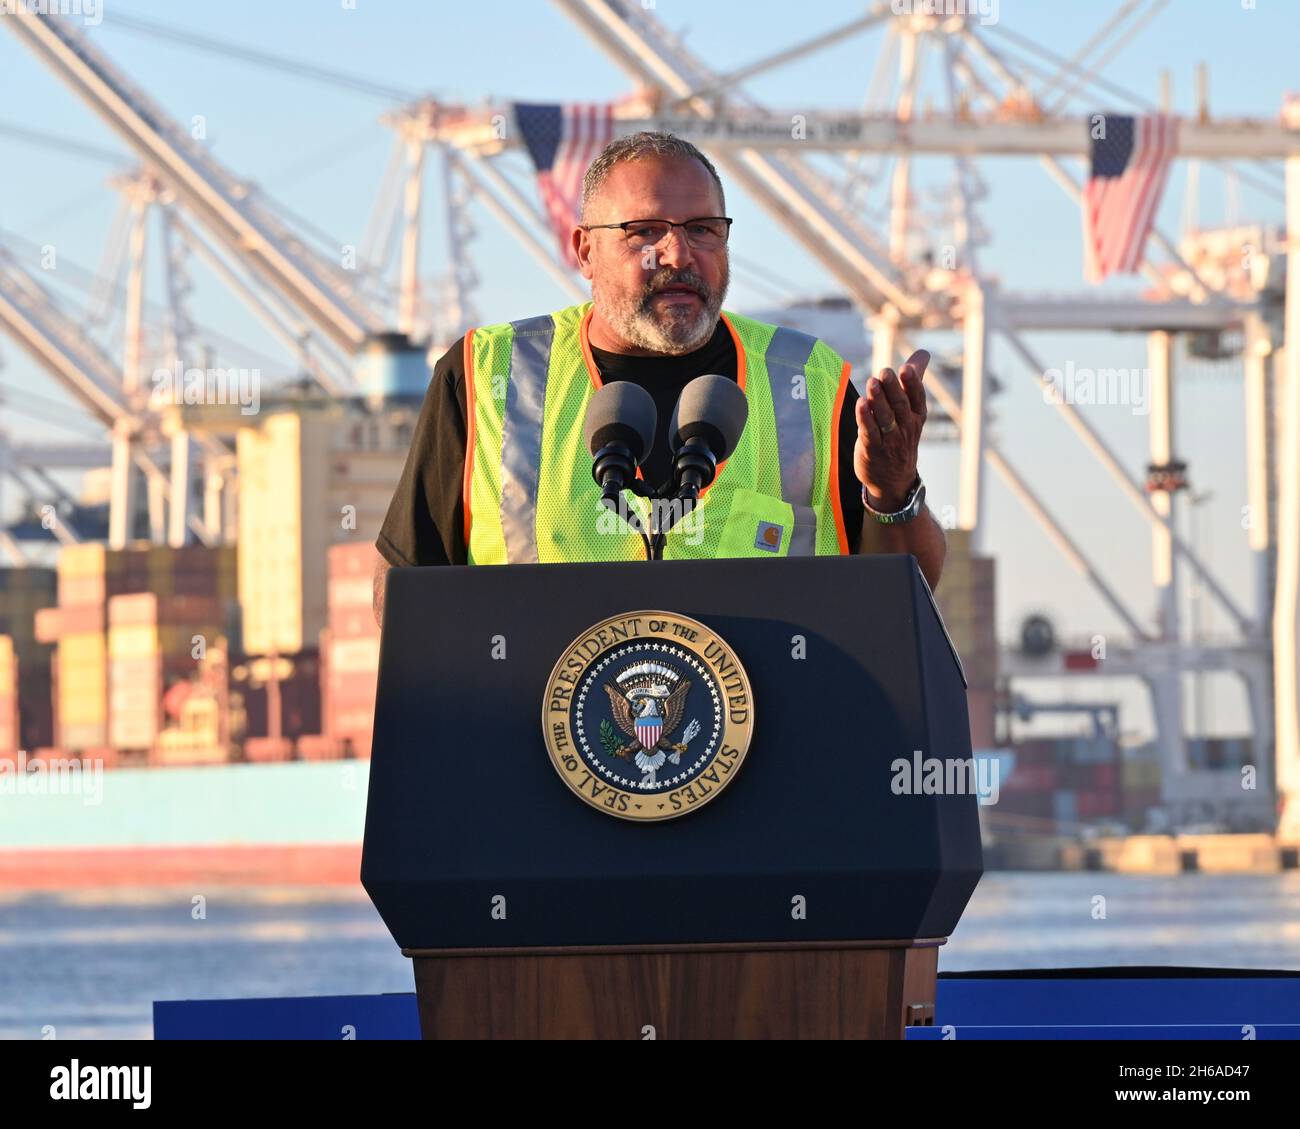 Baltimore, United States. 10 November, 2021. Longshoreman Tony Revels introduces President Joe Biden during a visit to the Port of Baltimore, November 10, 2021 in Baltimore, Maryland.  Credit: Joe Andrucyk/Maryland Governors Office/Alamy Live News Stock Photo